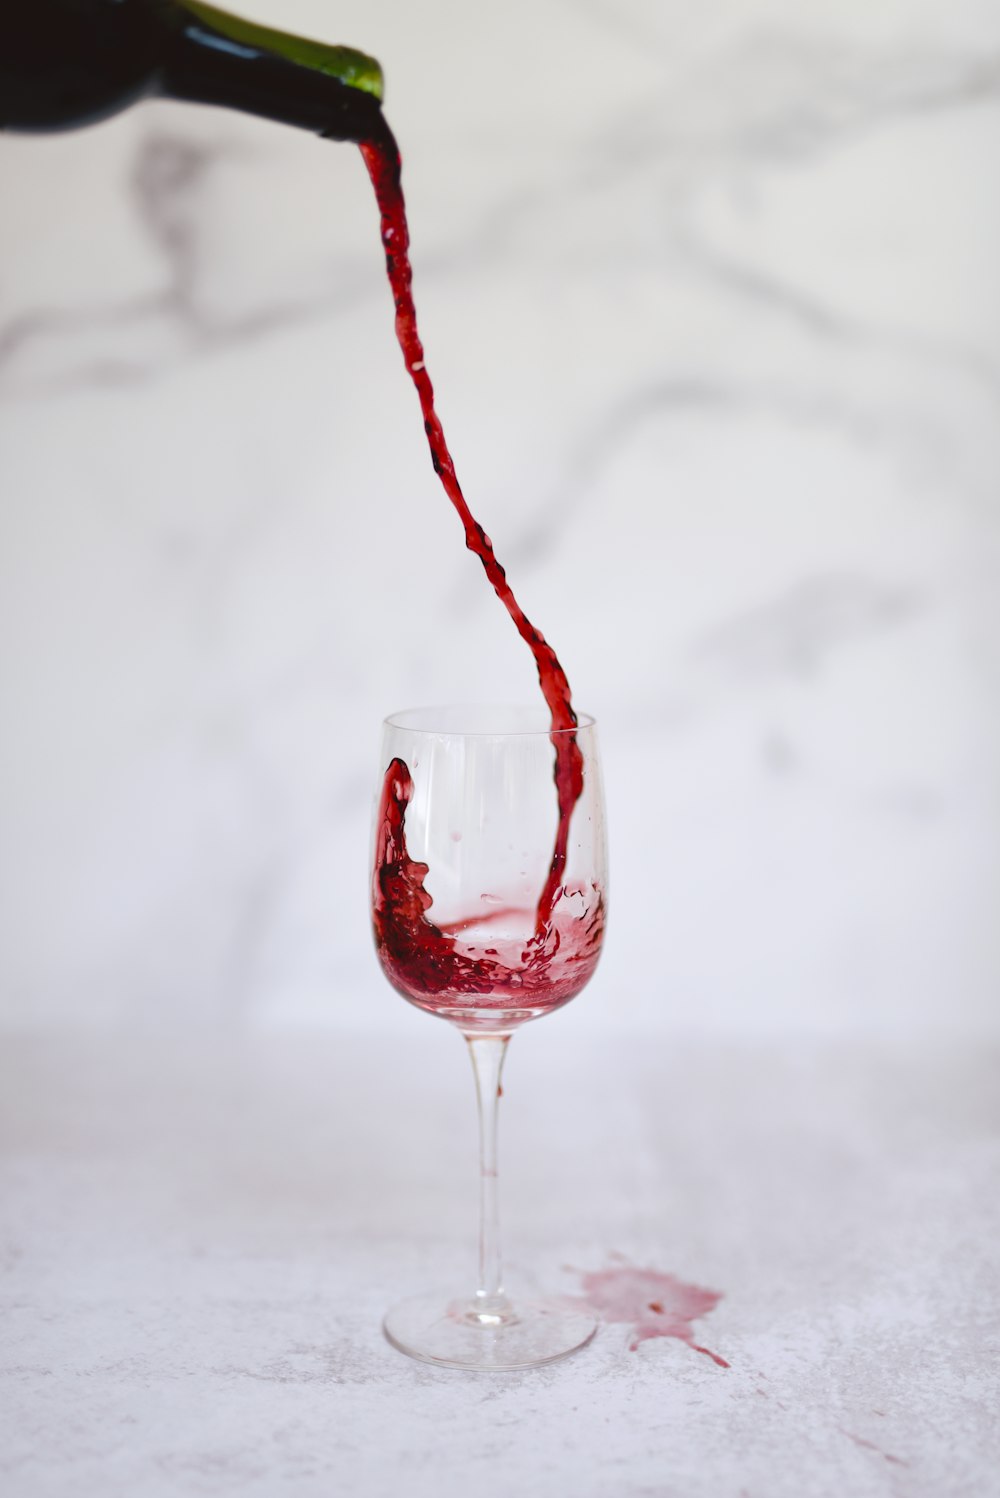 red wine in clear wine glass photo – Free Wine Image on Unsplash